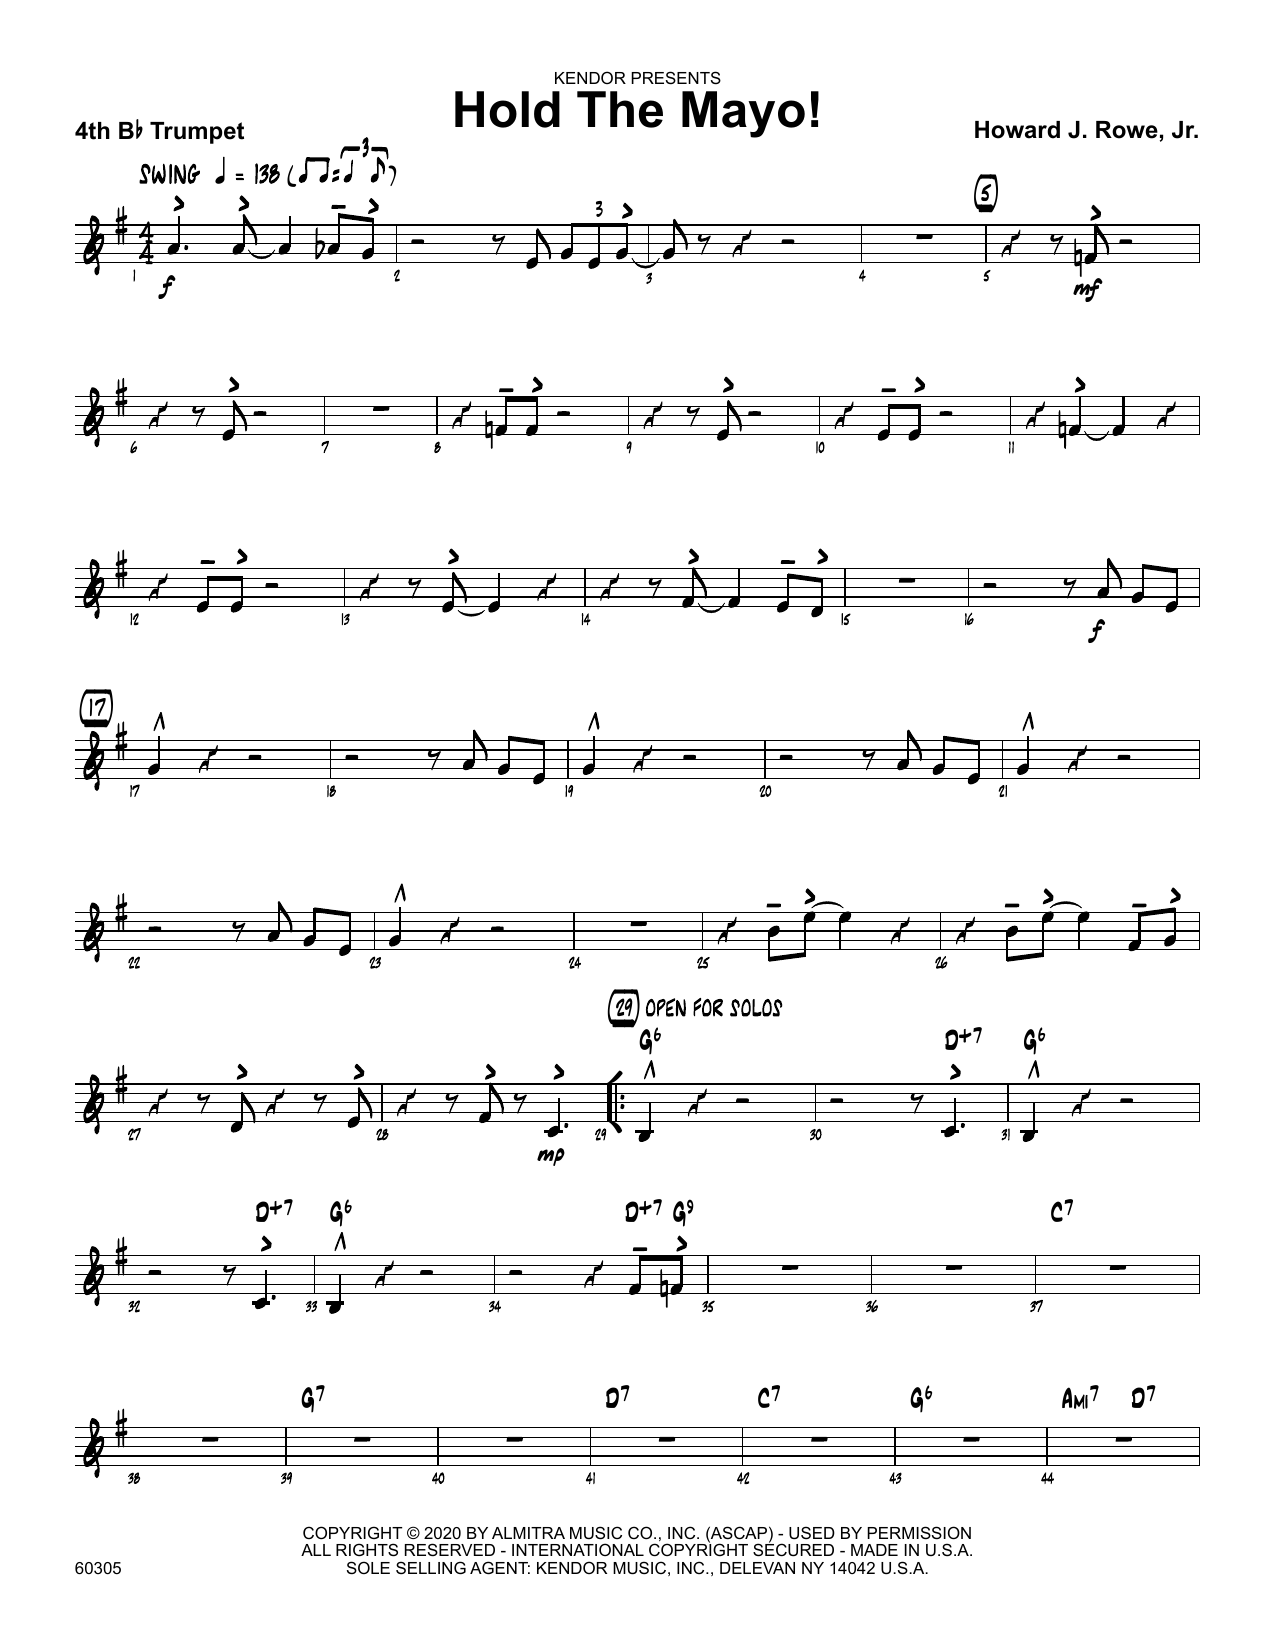 Download Howard Rowe Hold The Mayo! - 4th Bb Trumpet Sheet Music